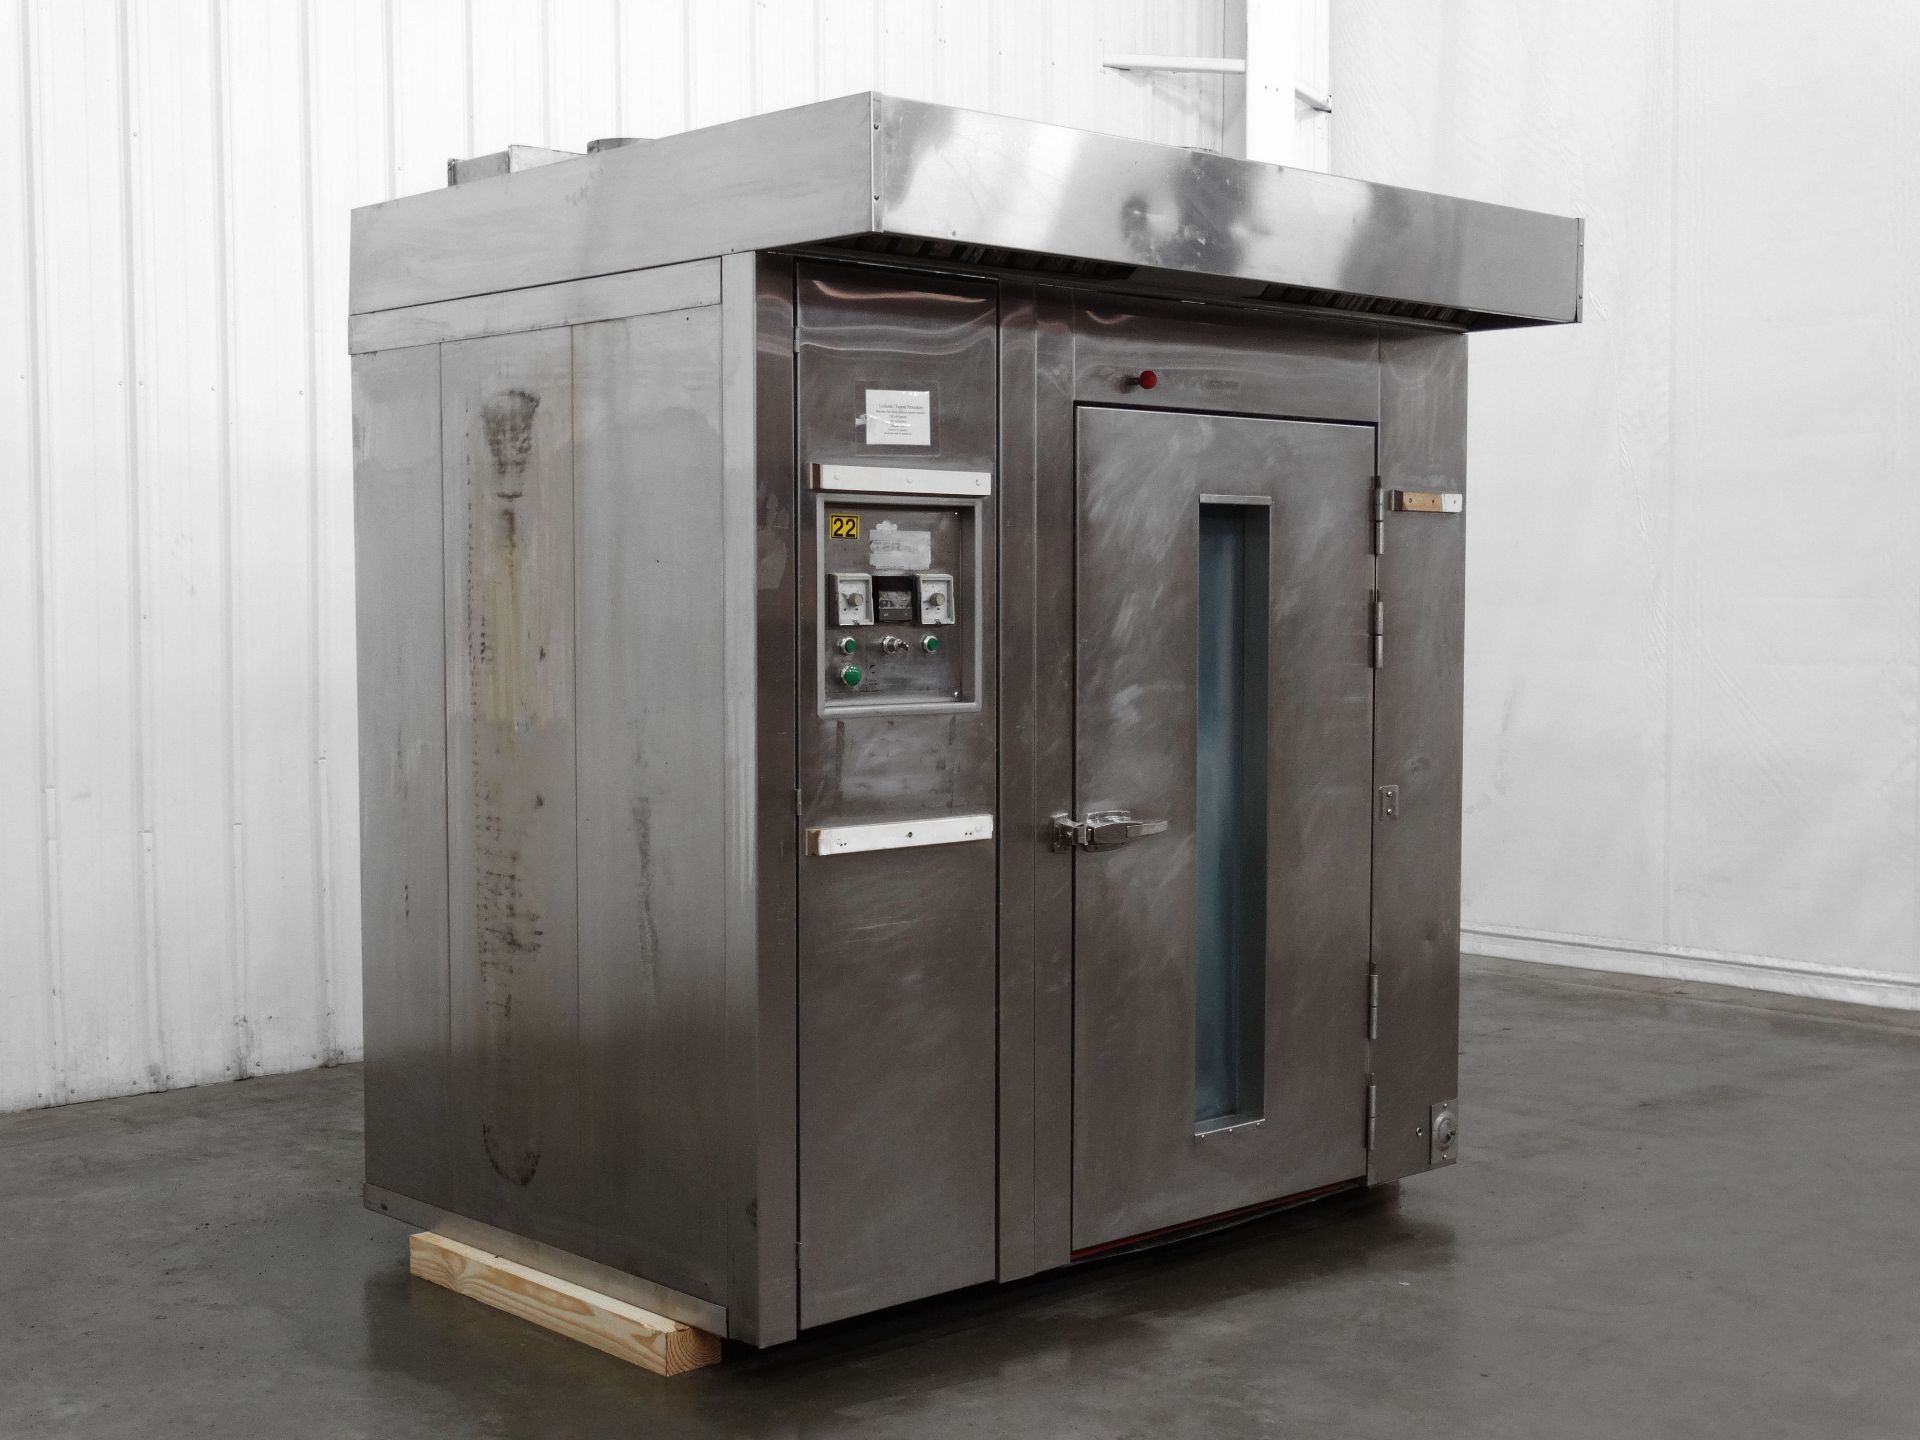 Baxter OV200G-M2 Double Rack Oven B4698 - Image 2 of 12